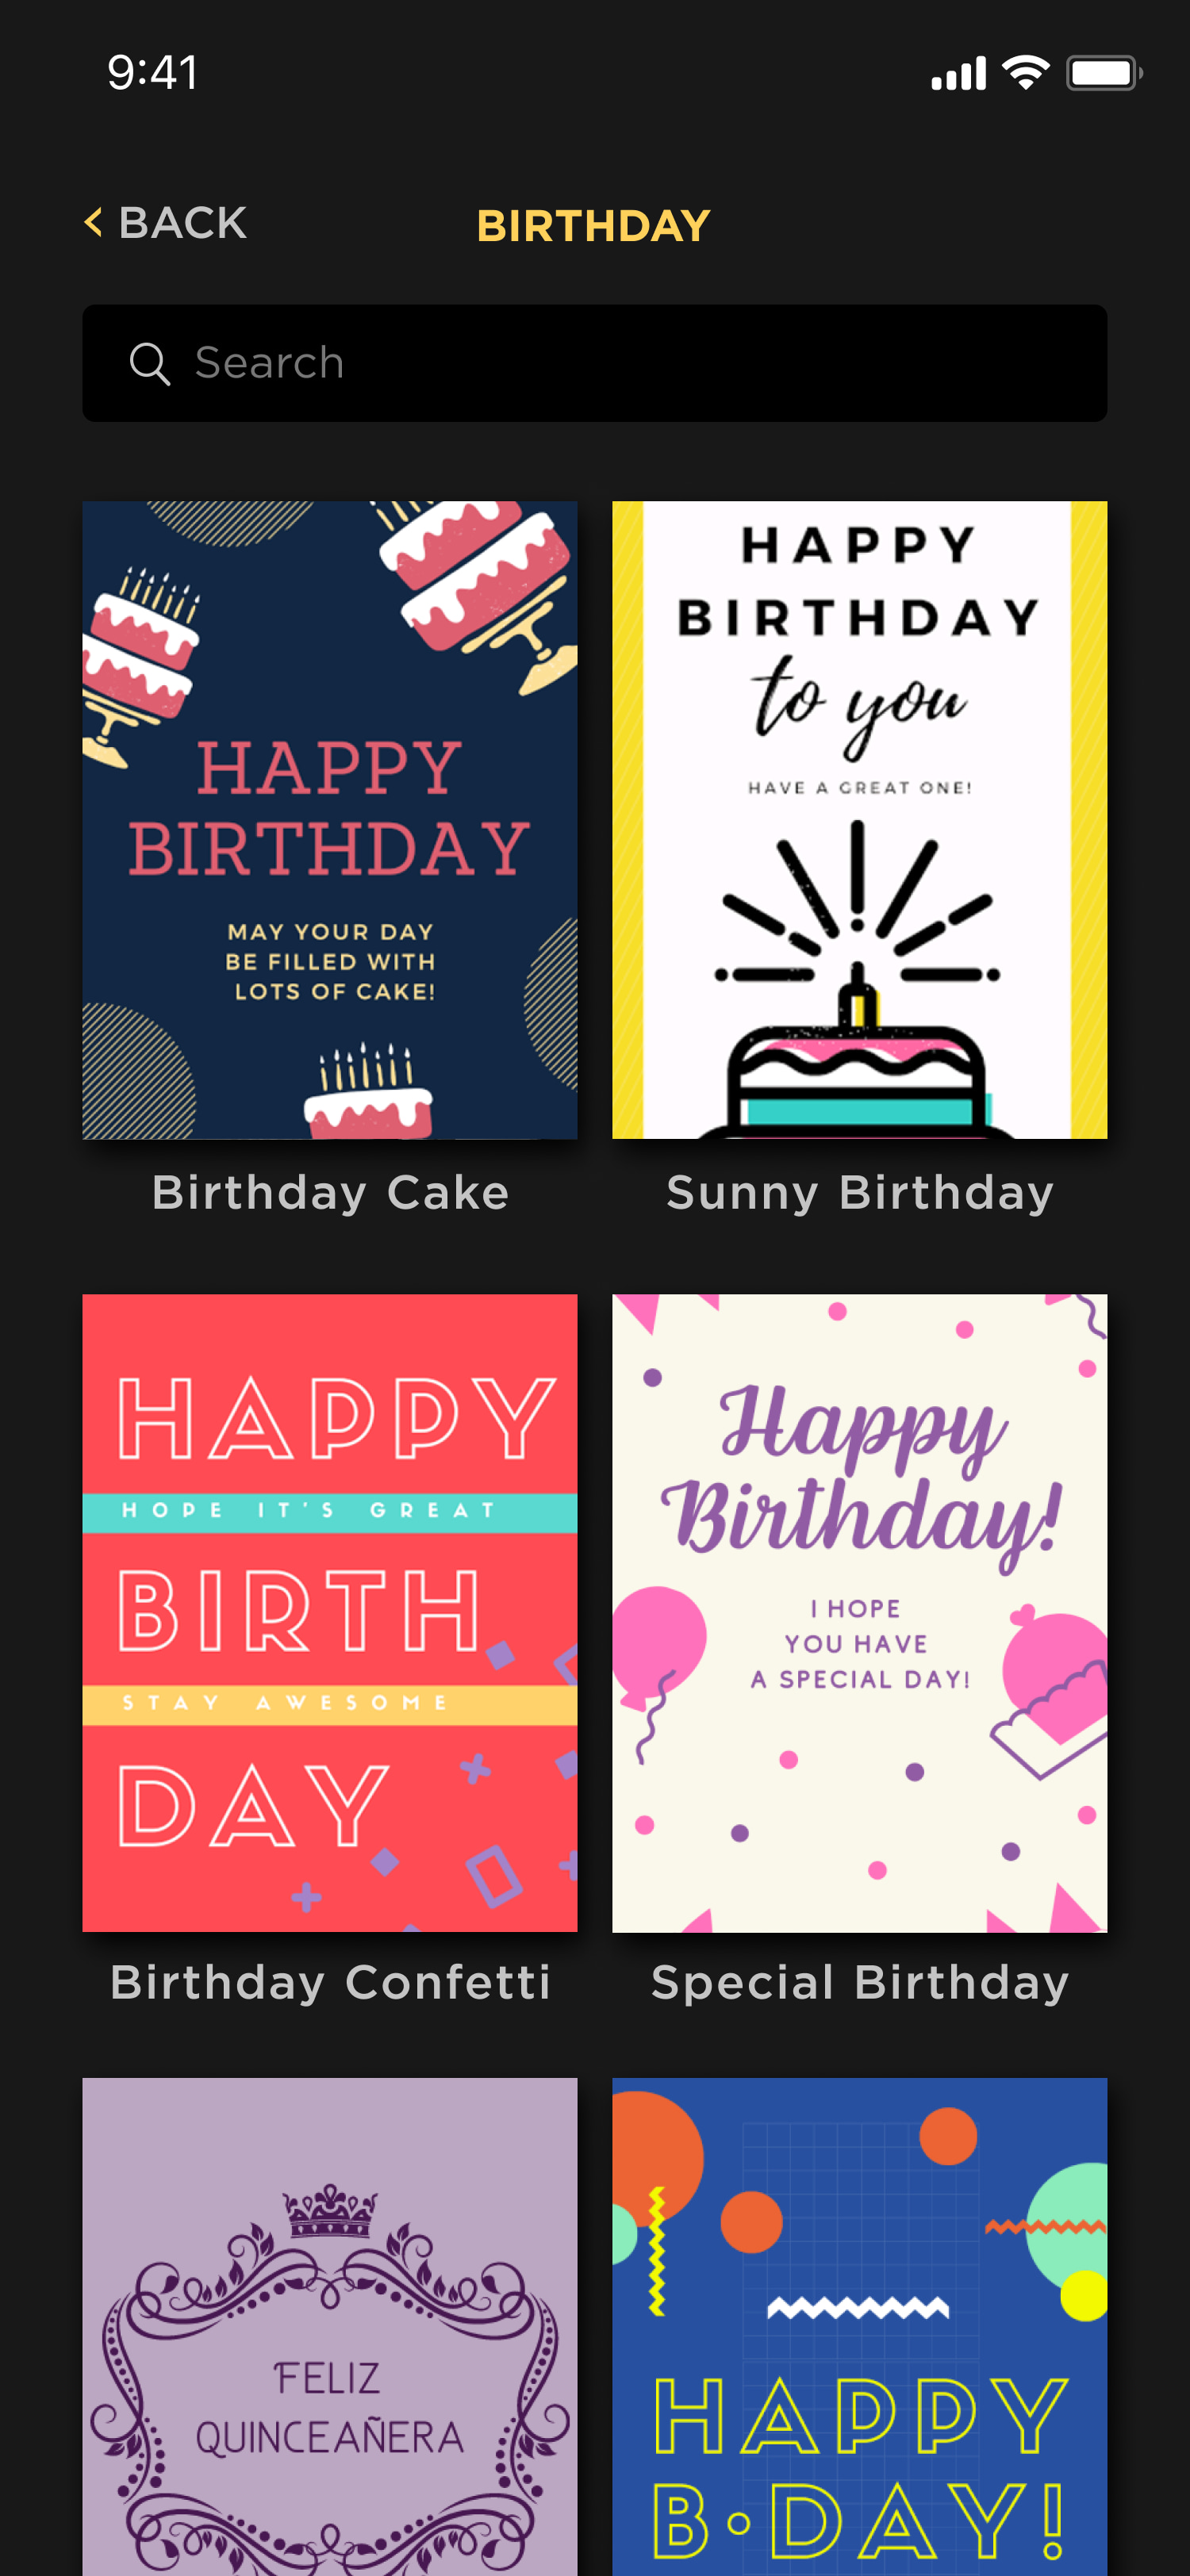 Future messages can be sent in the form of greeting cards, delivered to any future date or future milestone. Wedding cards, graduation cards, birthday cards, and more.